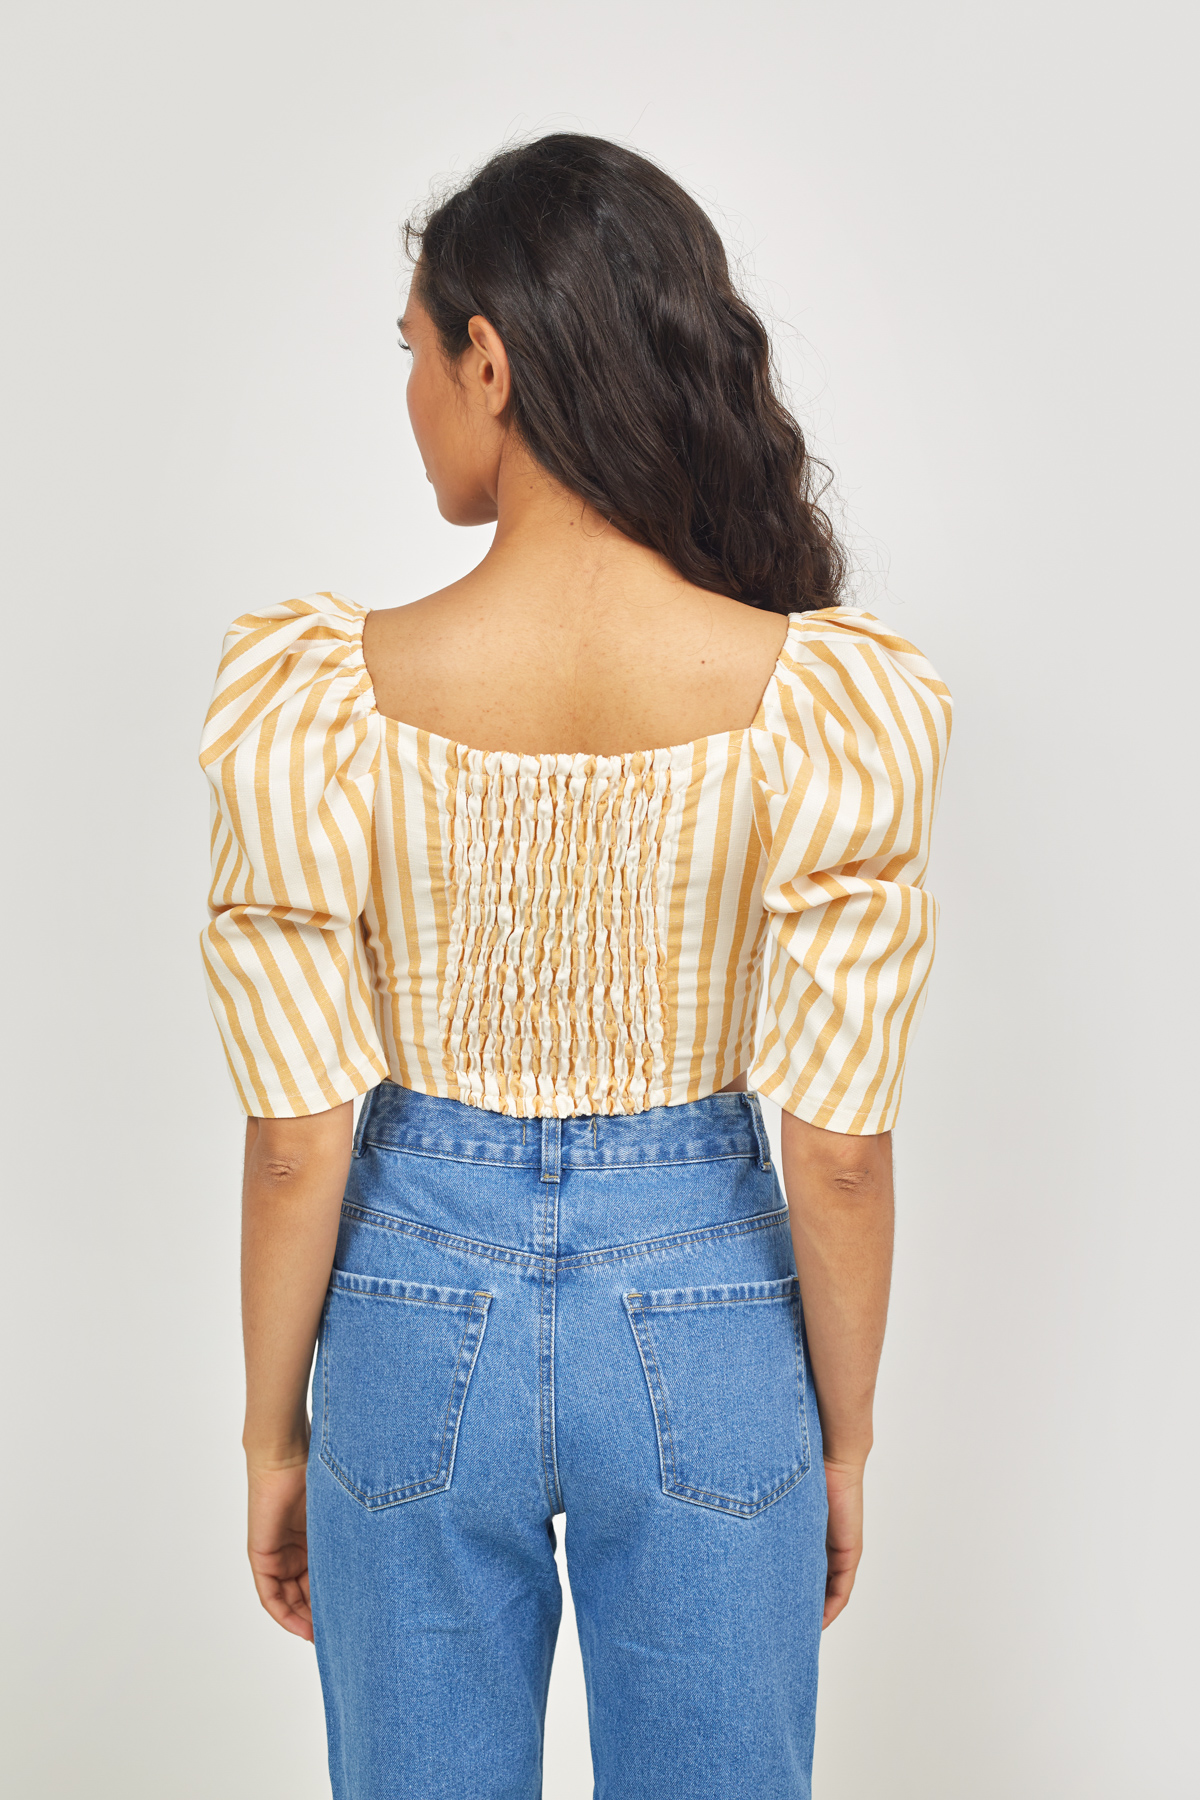 Crop top in yellow stripes, photo 4